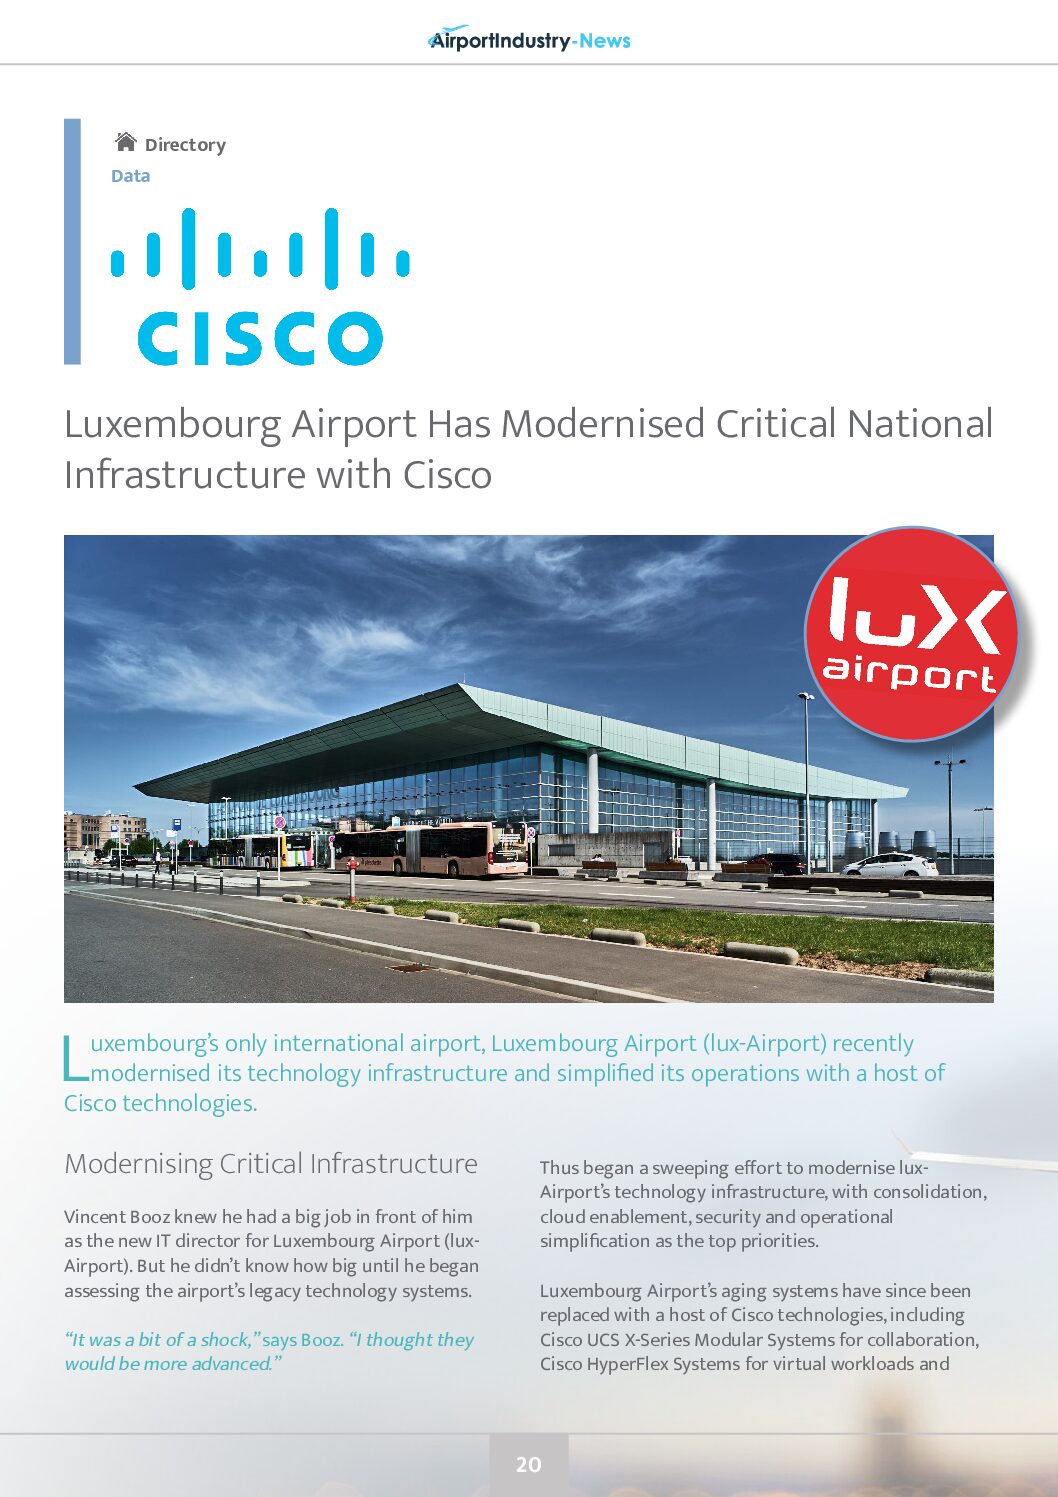 Luxembourg Airport Has Modernised Critical National Infrastructure with Cisco